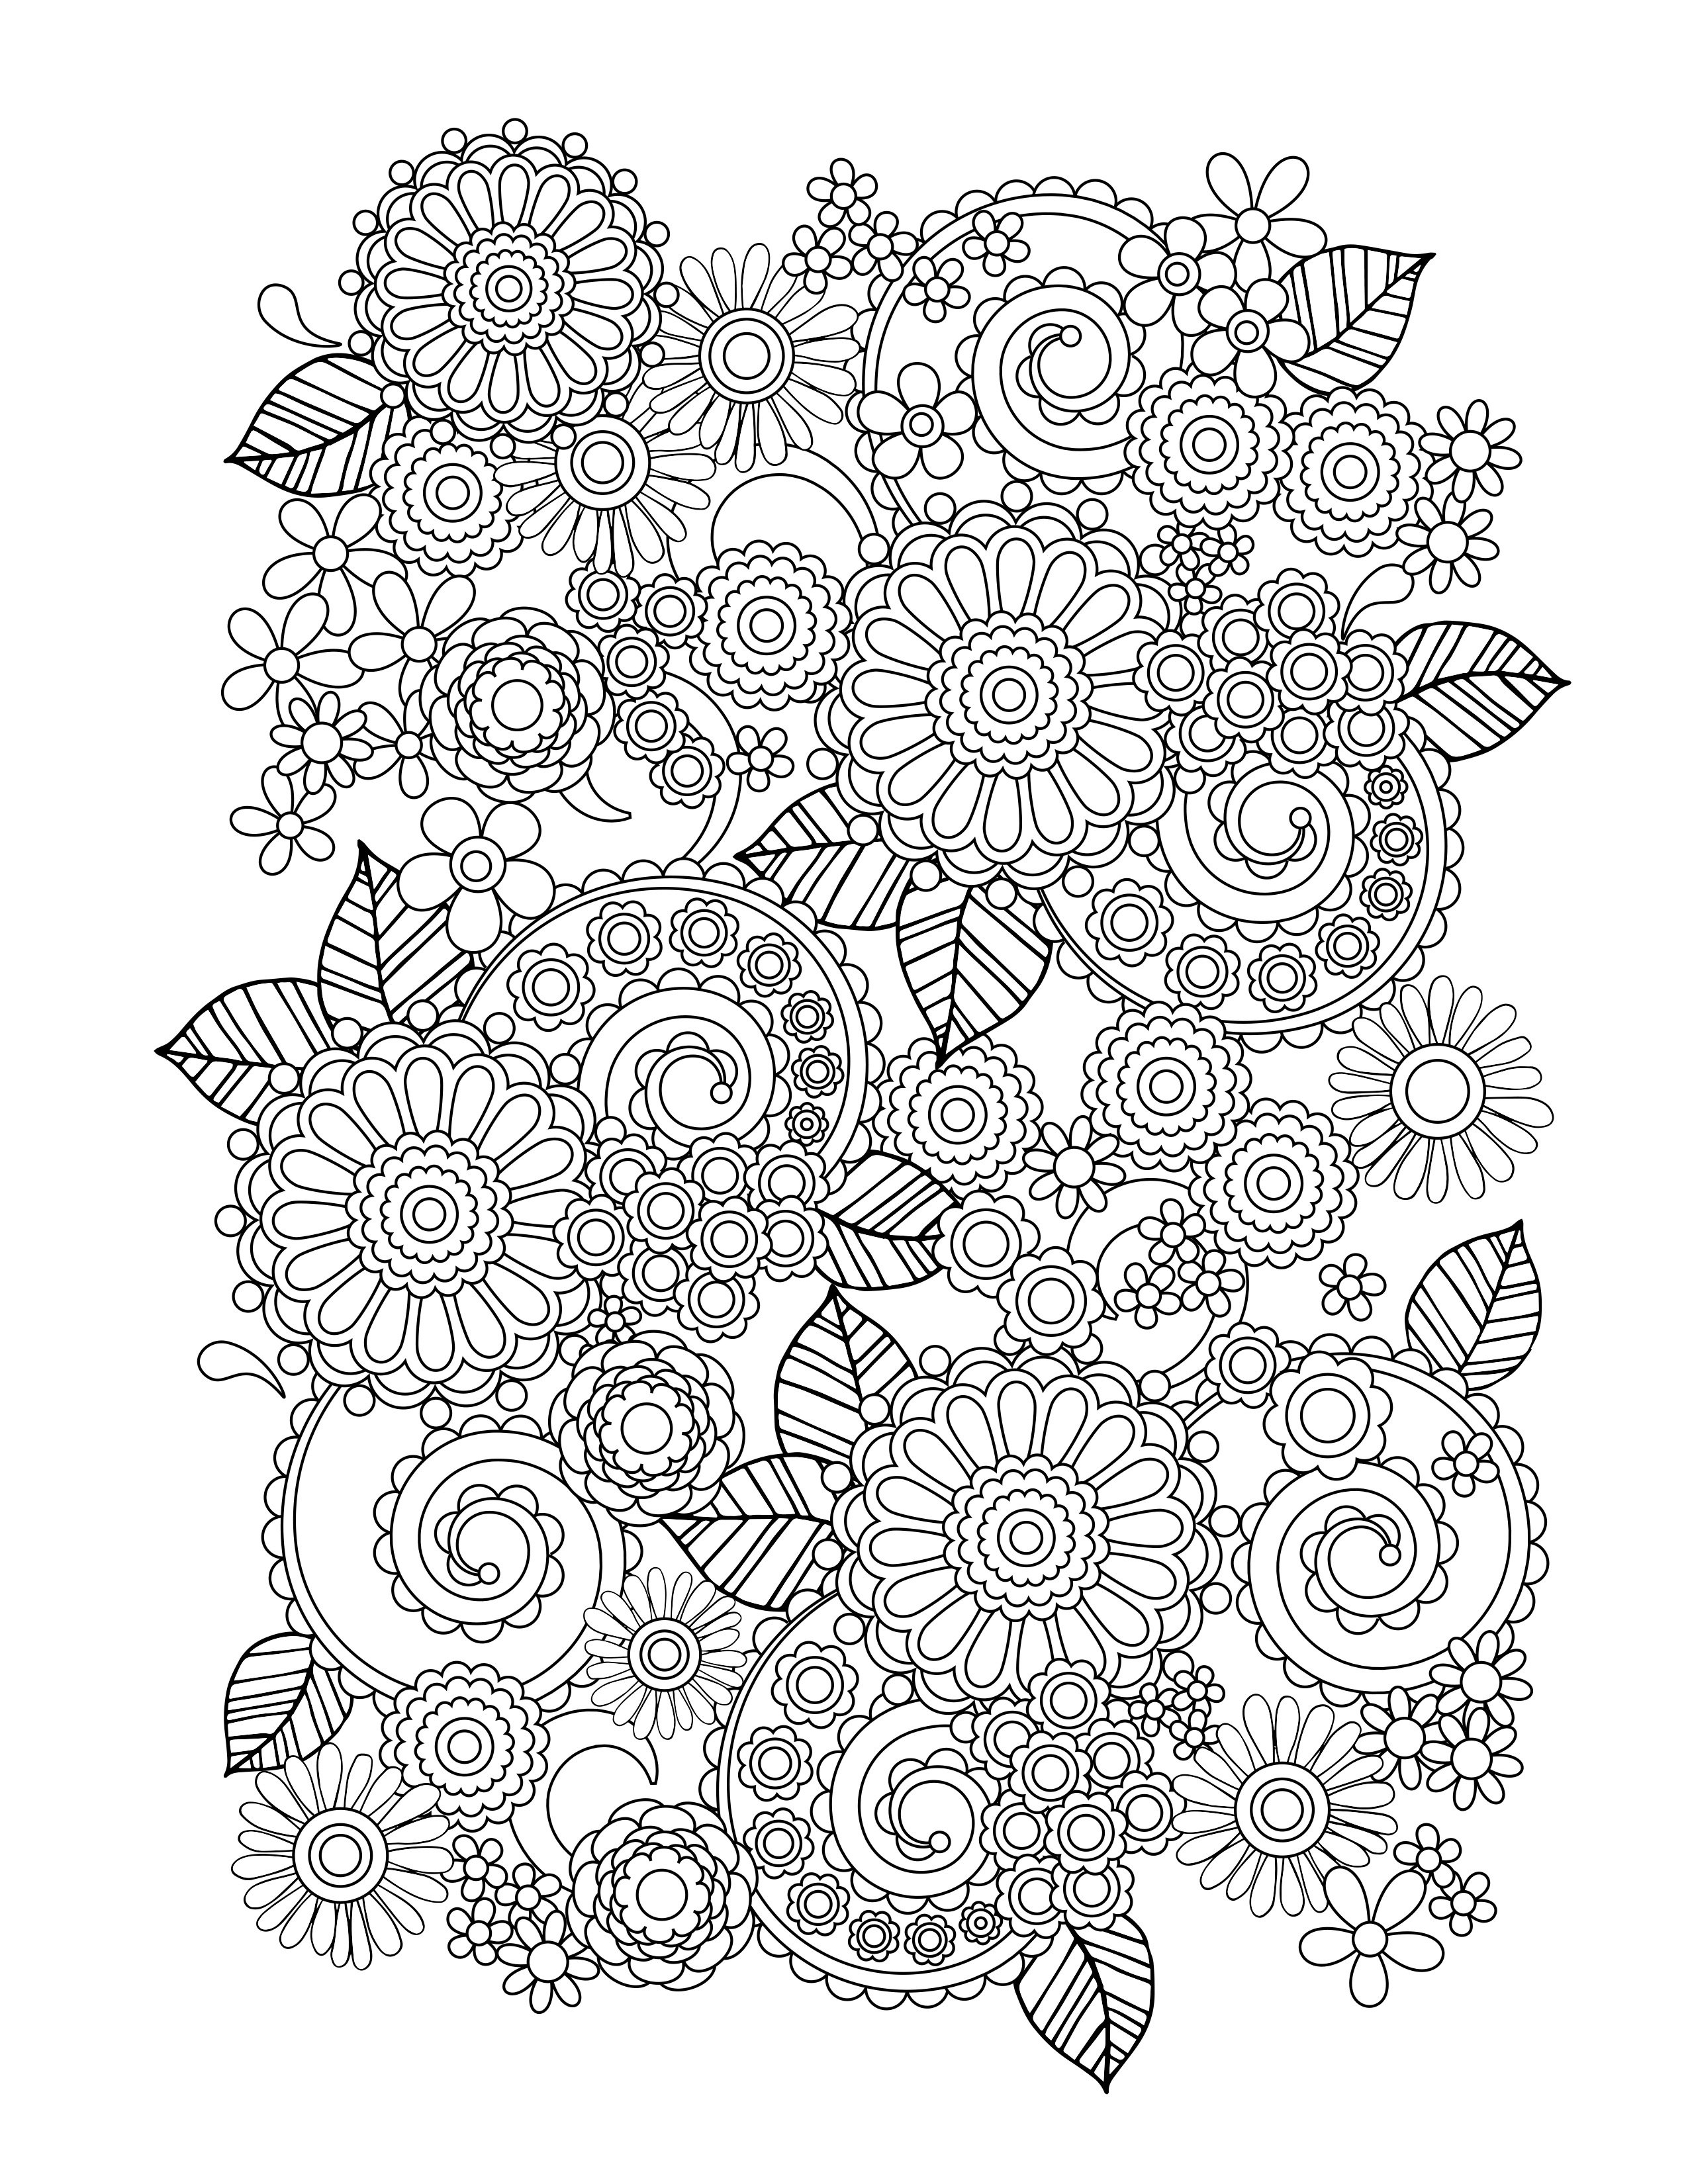 Flower Coloring Pages for Adults   Best Coloring Pages For ...